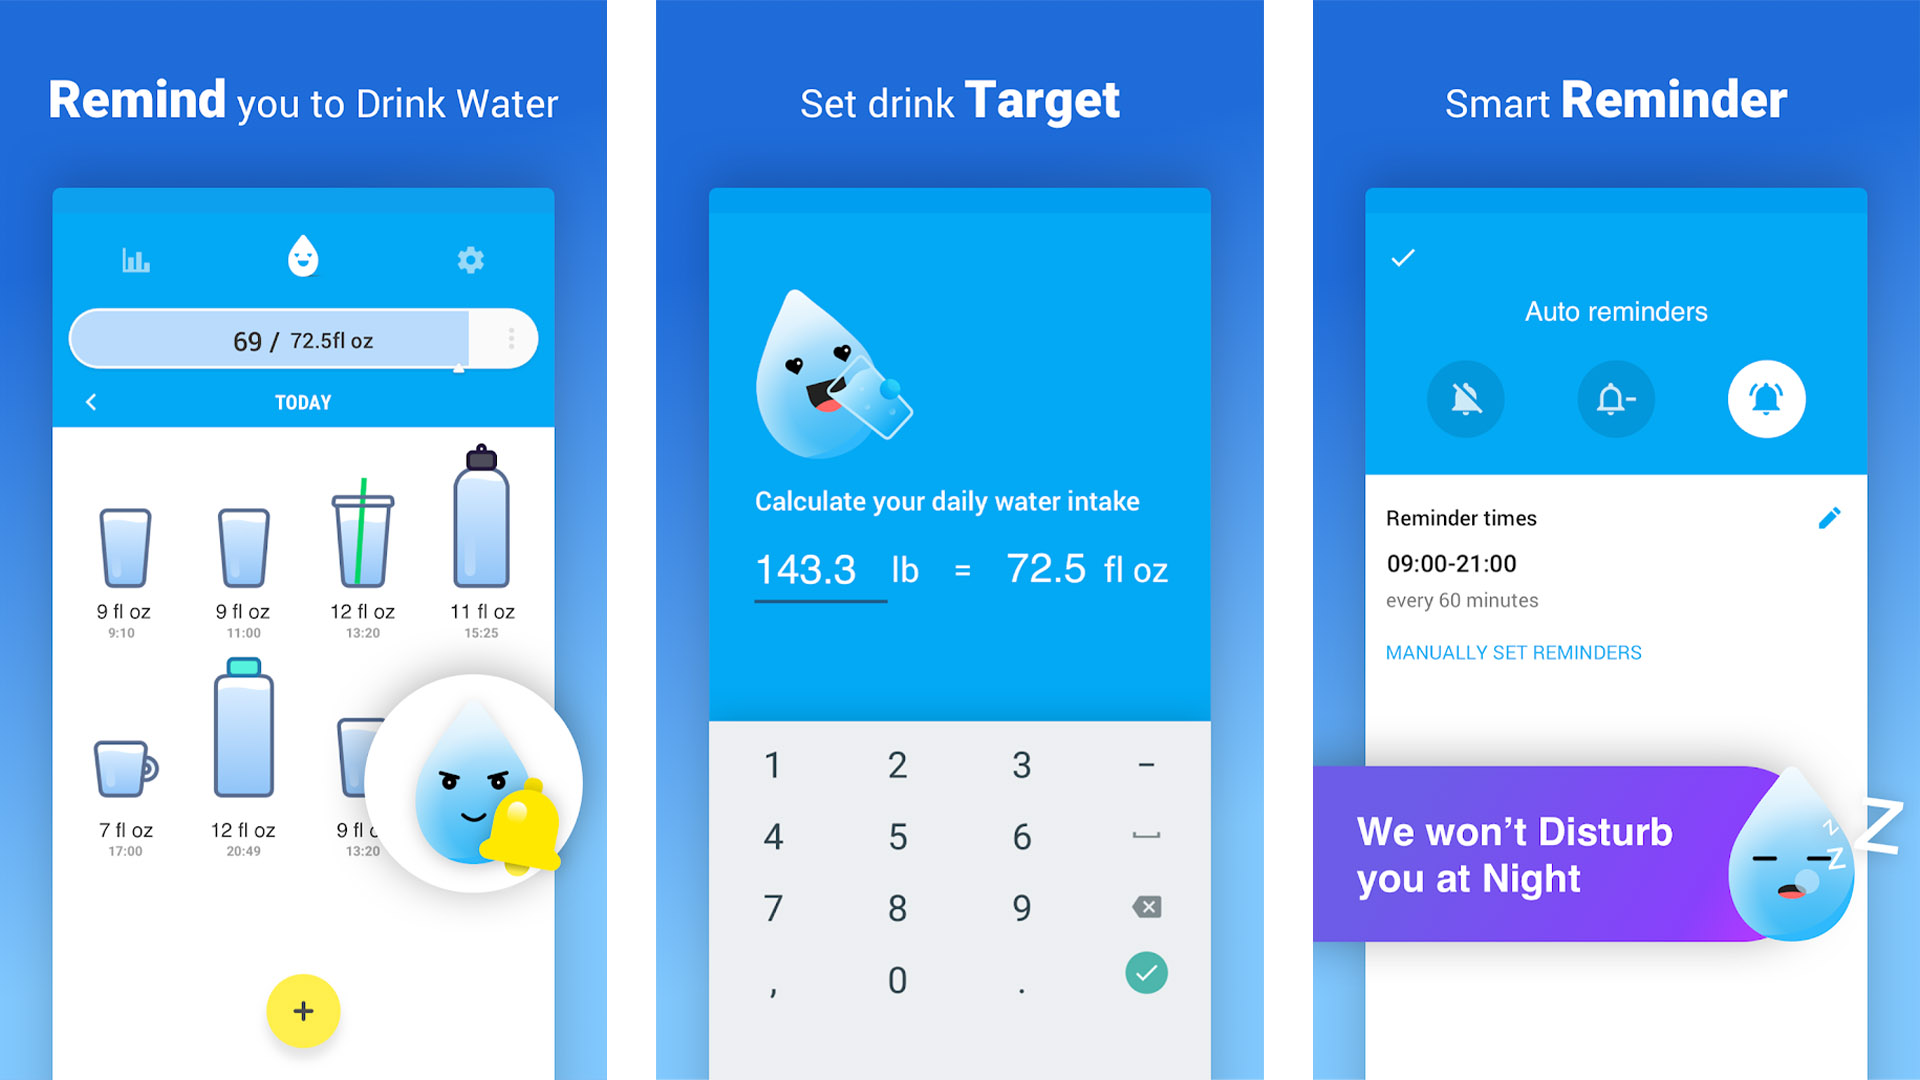 Leap Fitness is one of the Drink Water Reminder apps for android